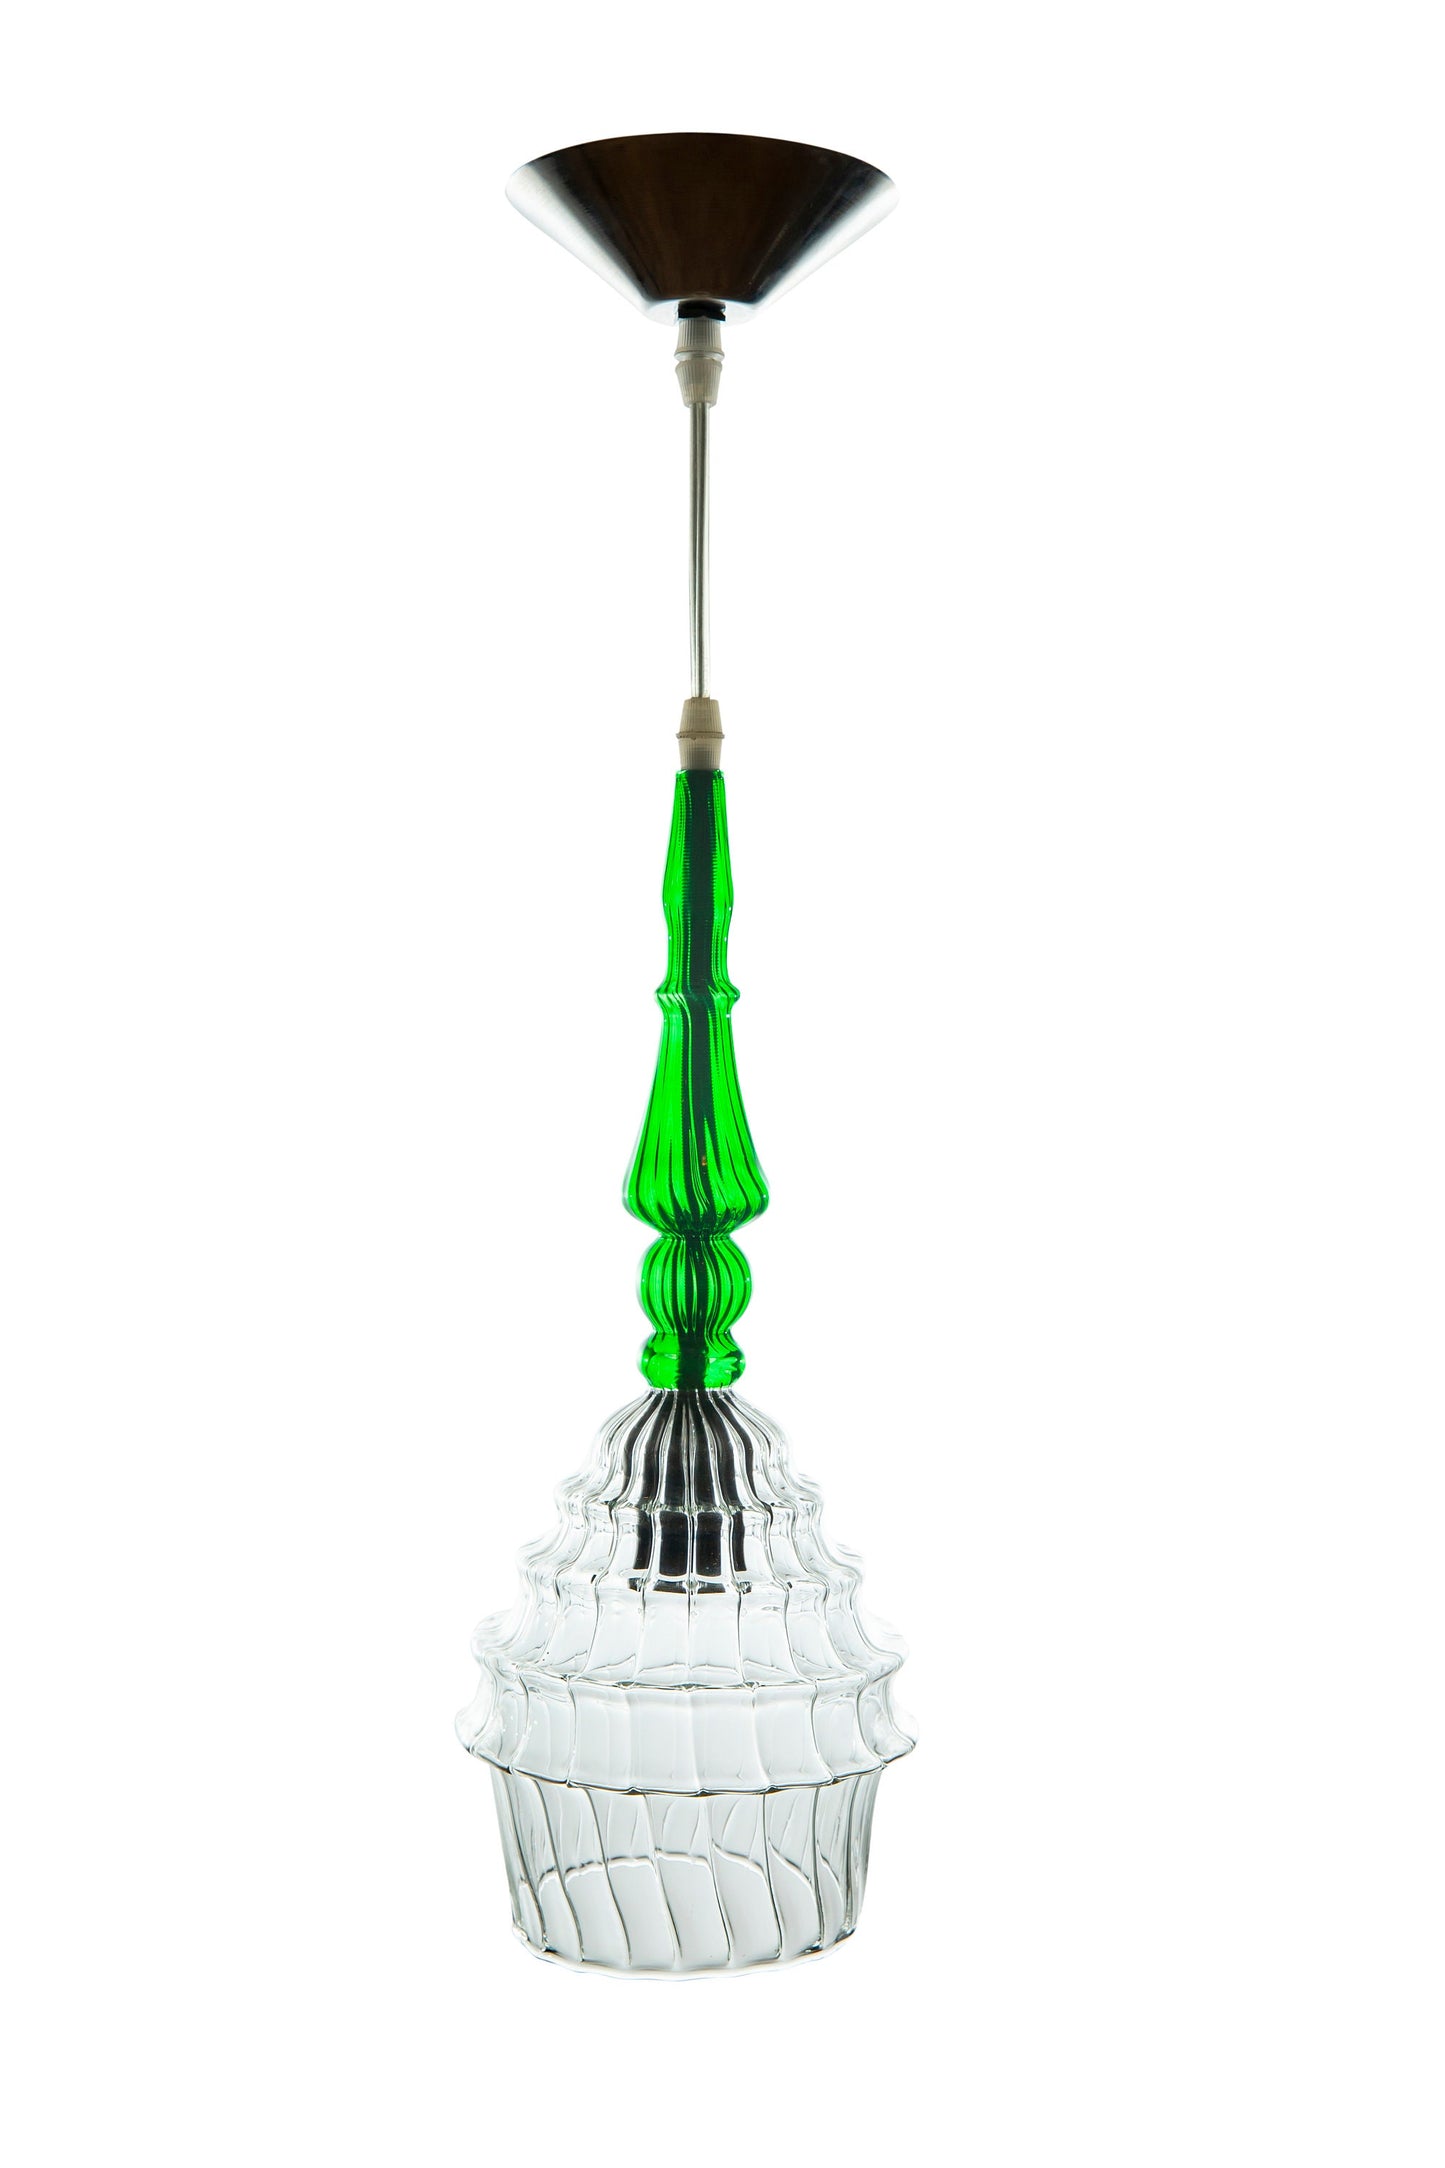 Hanging Lamp for Dining Room Lights - Les Trois Pyramides